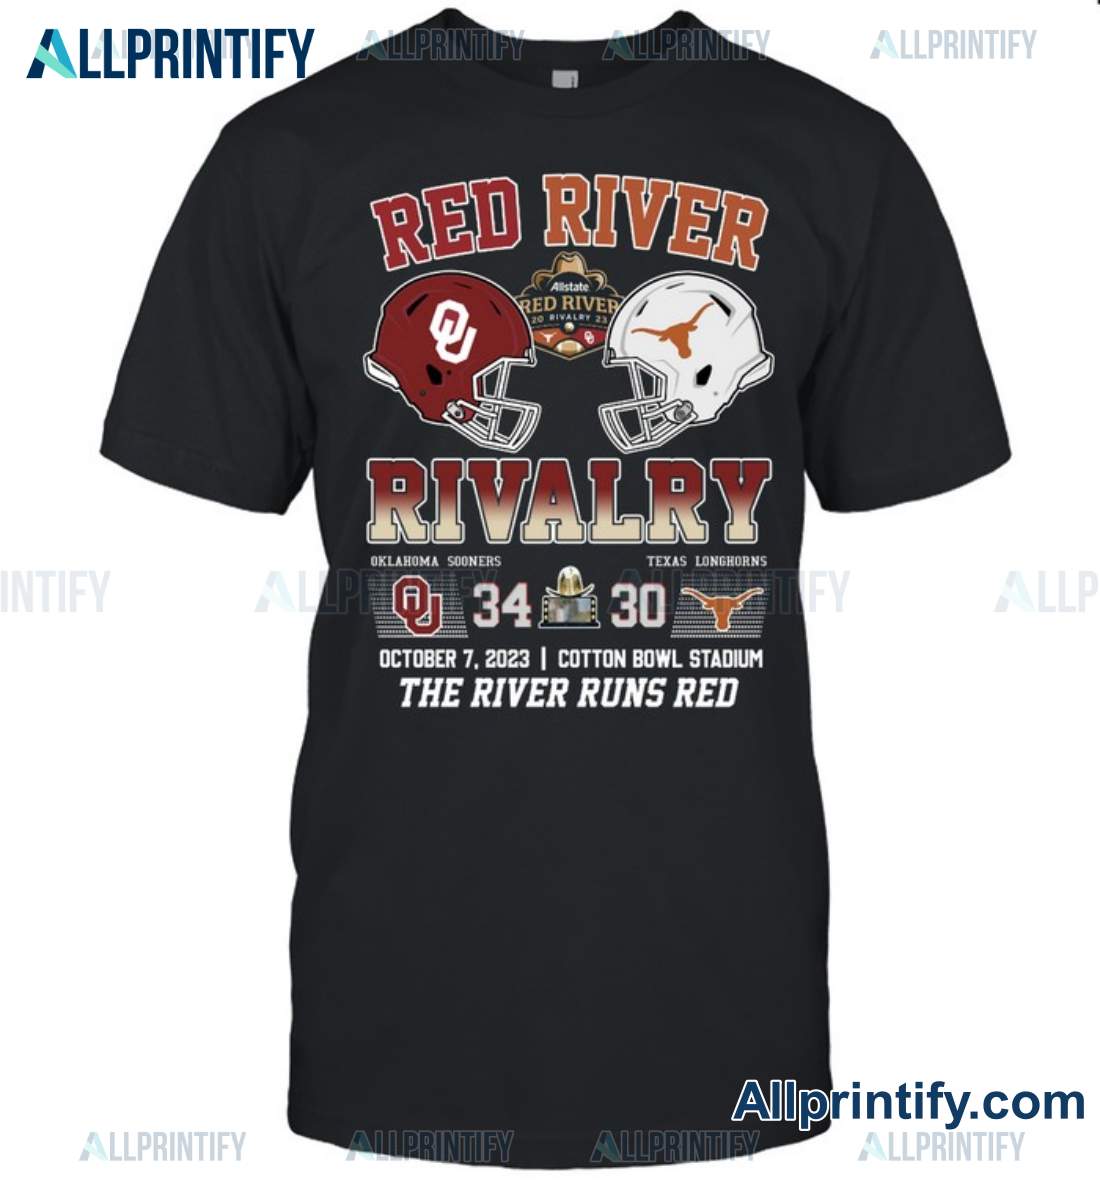 Red River Rivalry Oklahoma Sooners Texas Longhorns 34-30 The River Runs Red Shirt a